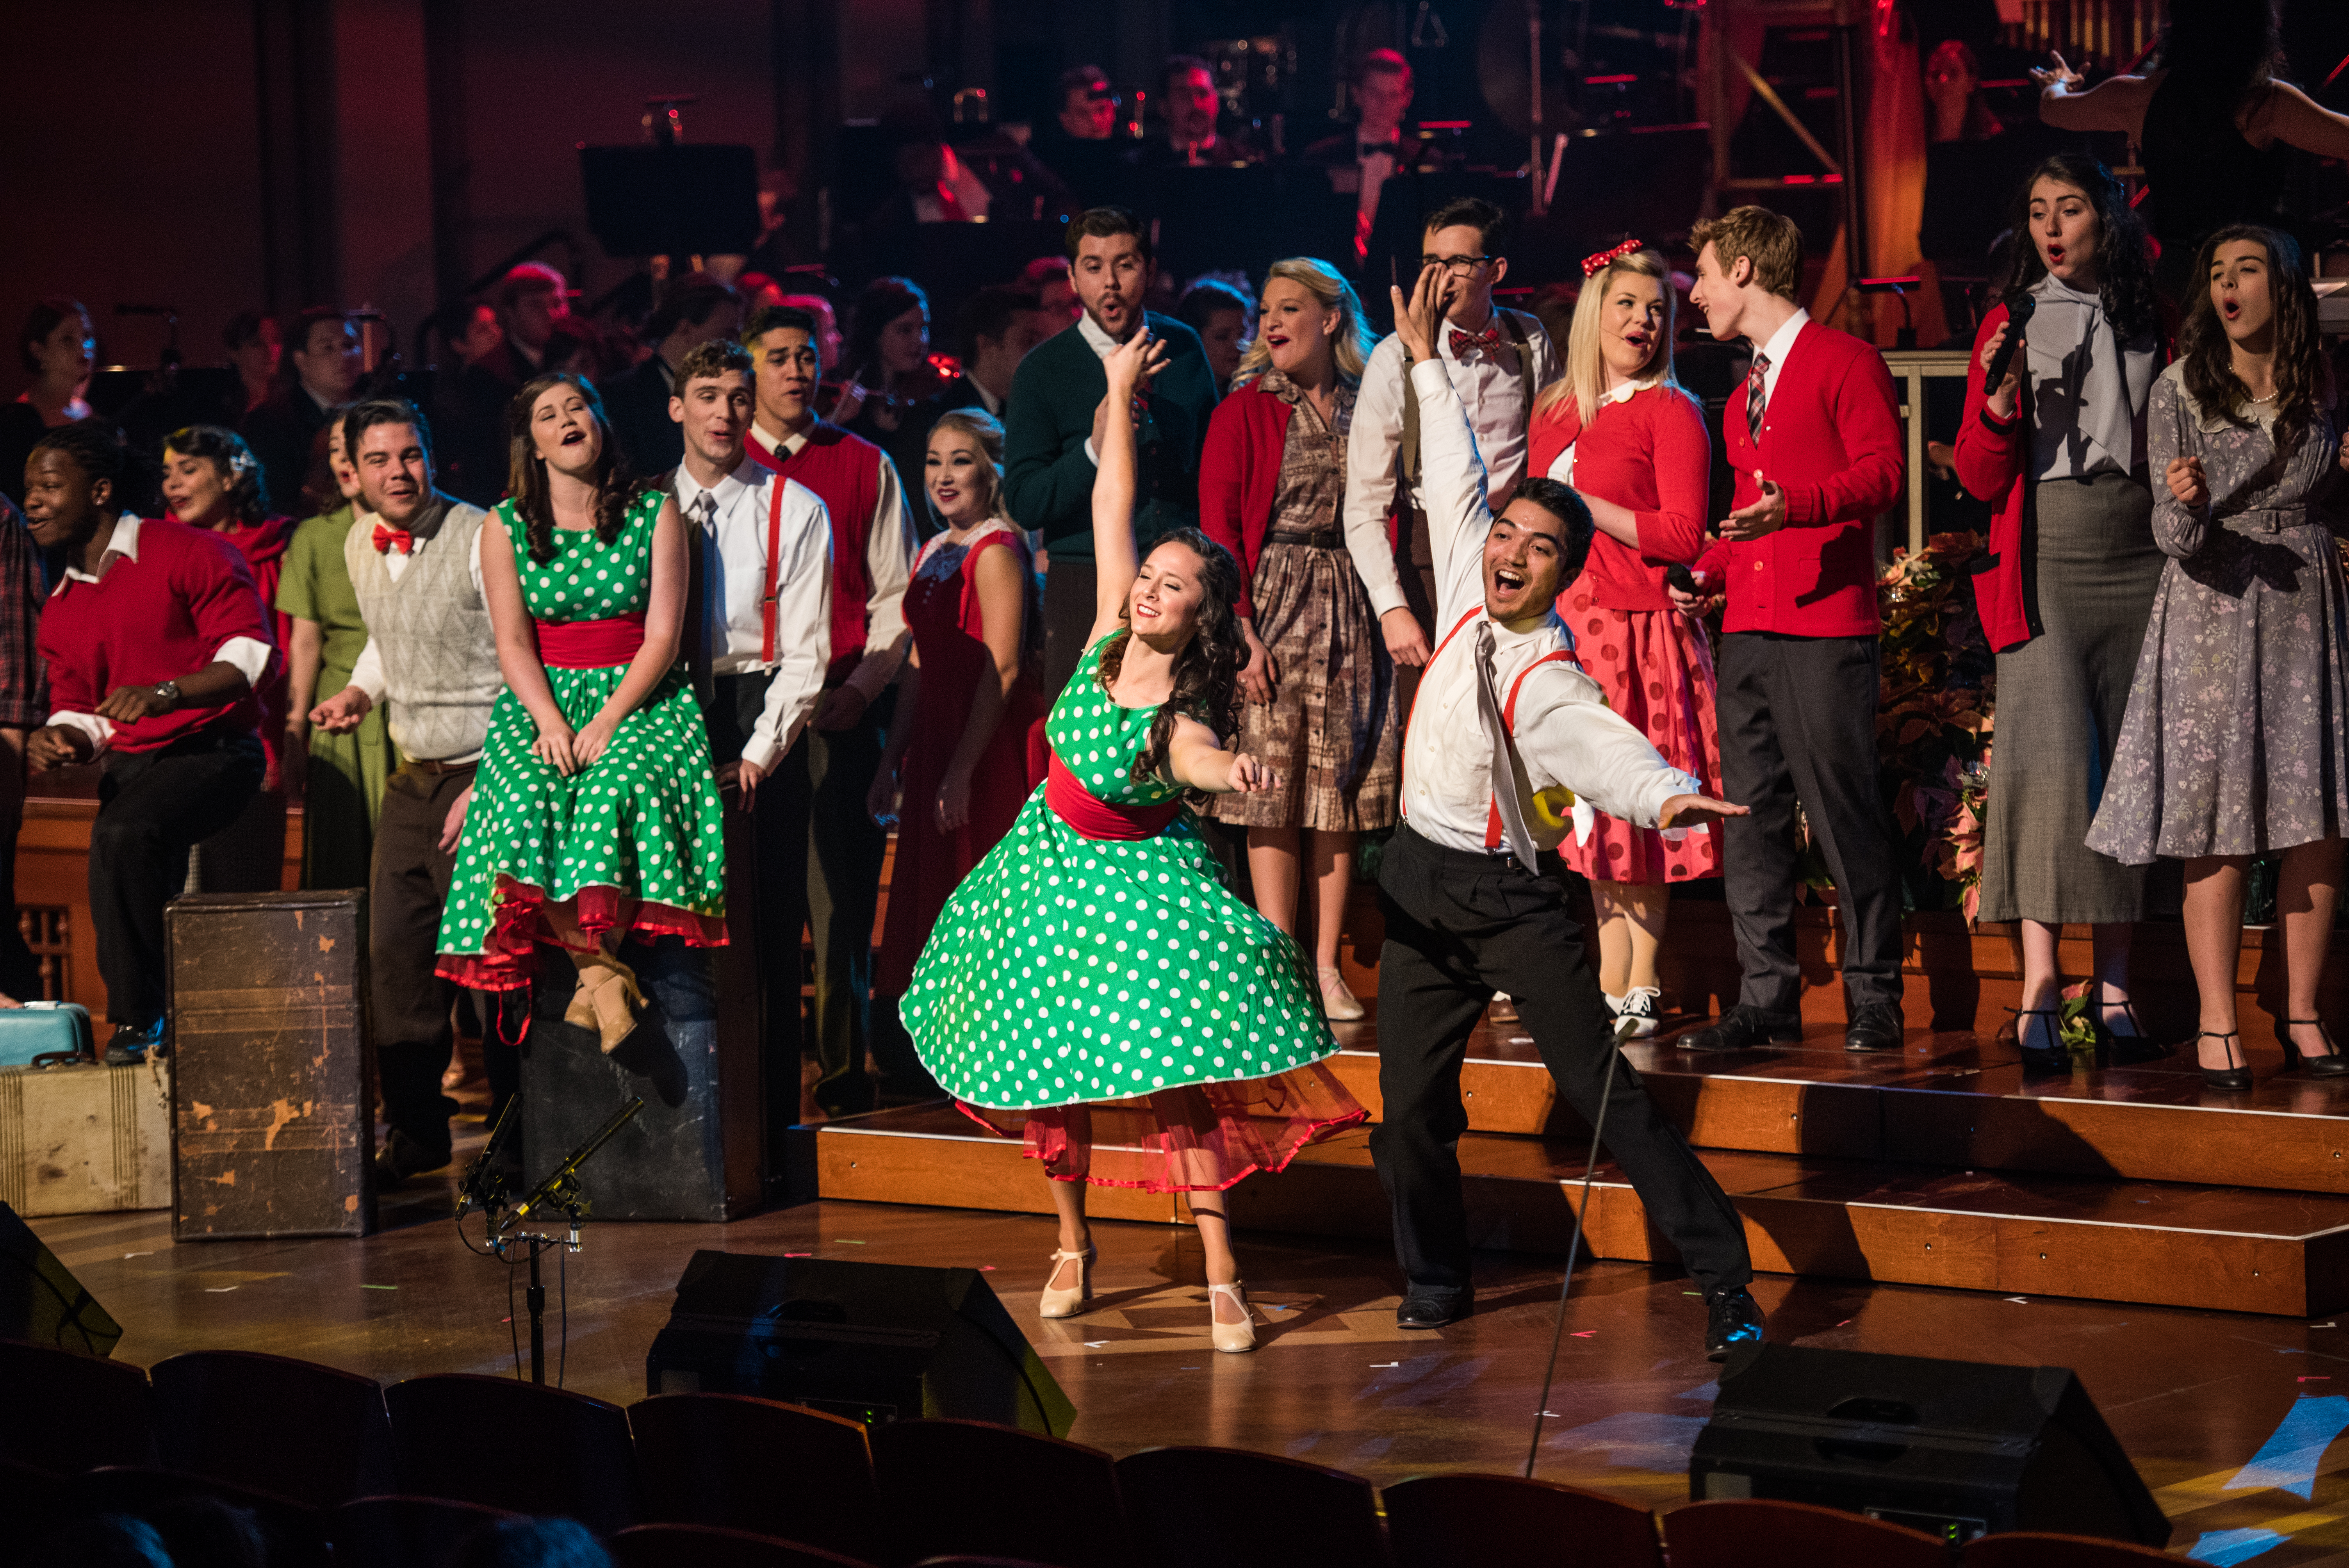 Student perform at Christmas at Belmont in December 2015